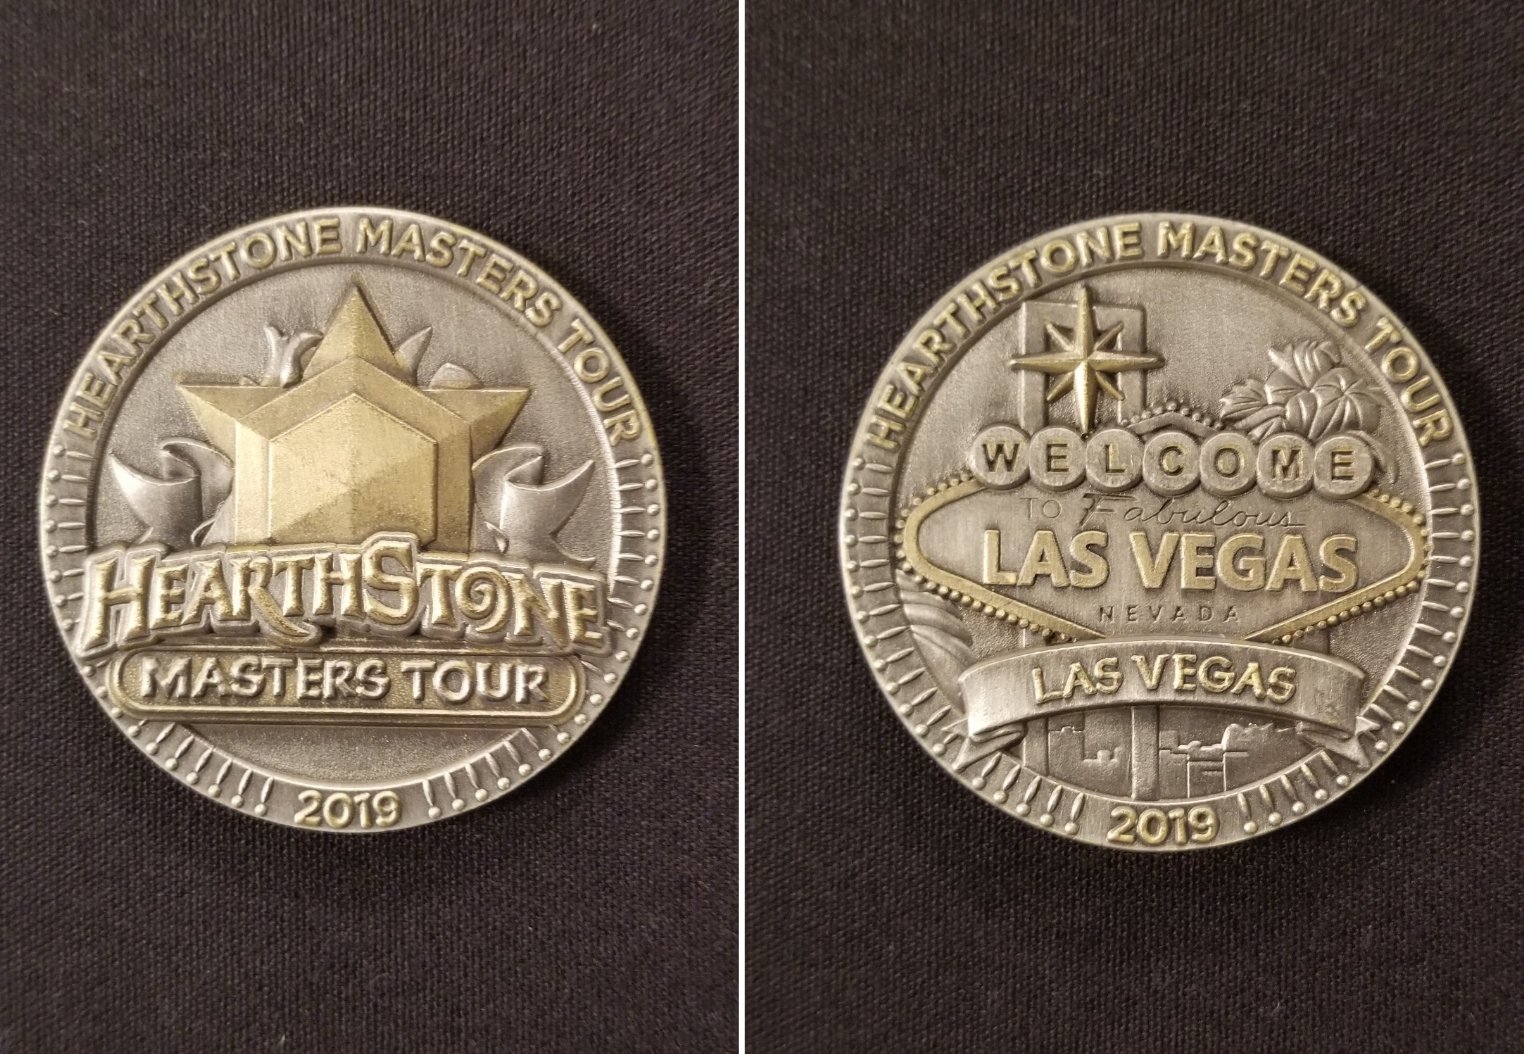 Hearthstone Esports on Twitter: Commemorative coin competitors at #MastersTourVegas! https://t.co/dizTB5Xskt" Twitter